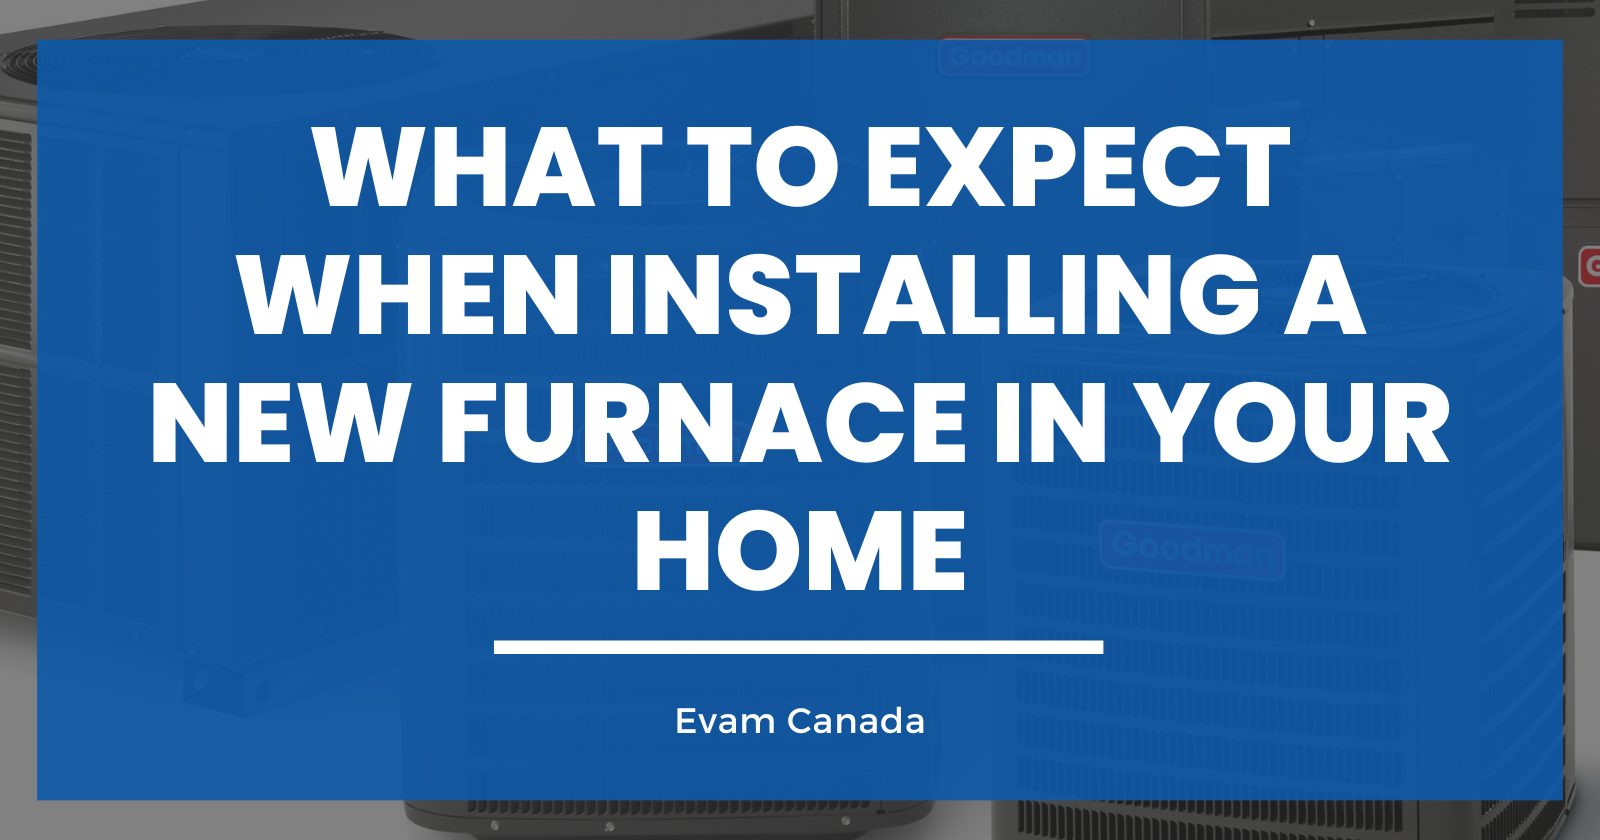 What to Expect When Installing a New Furnace in Your Home